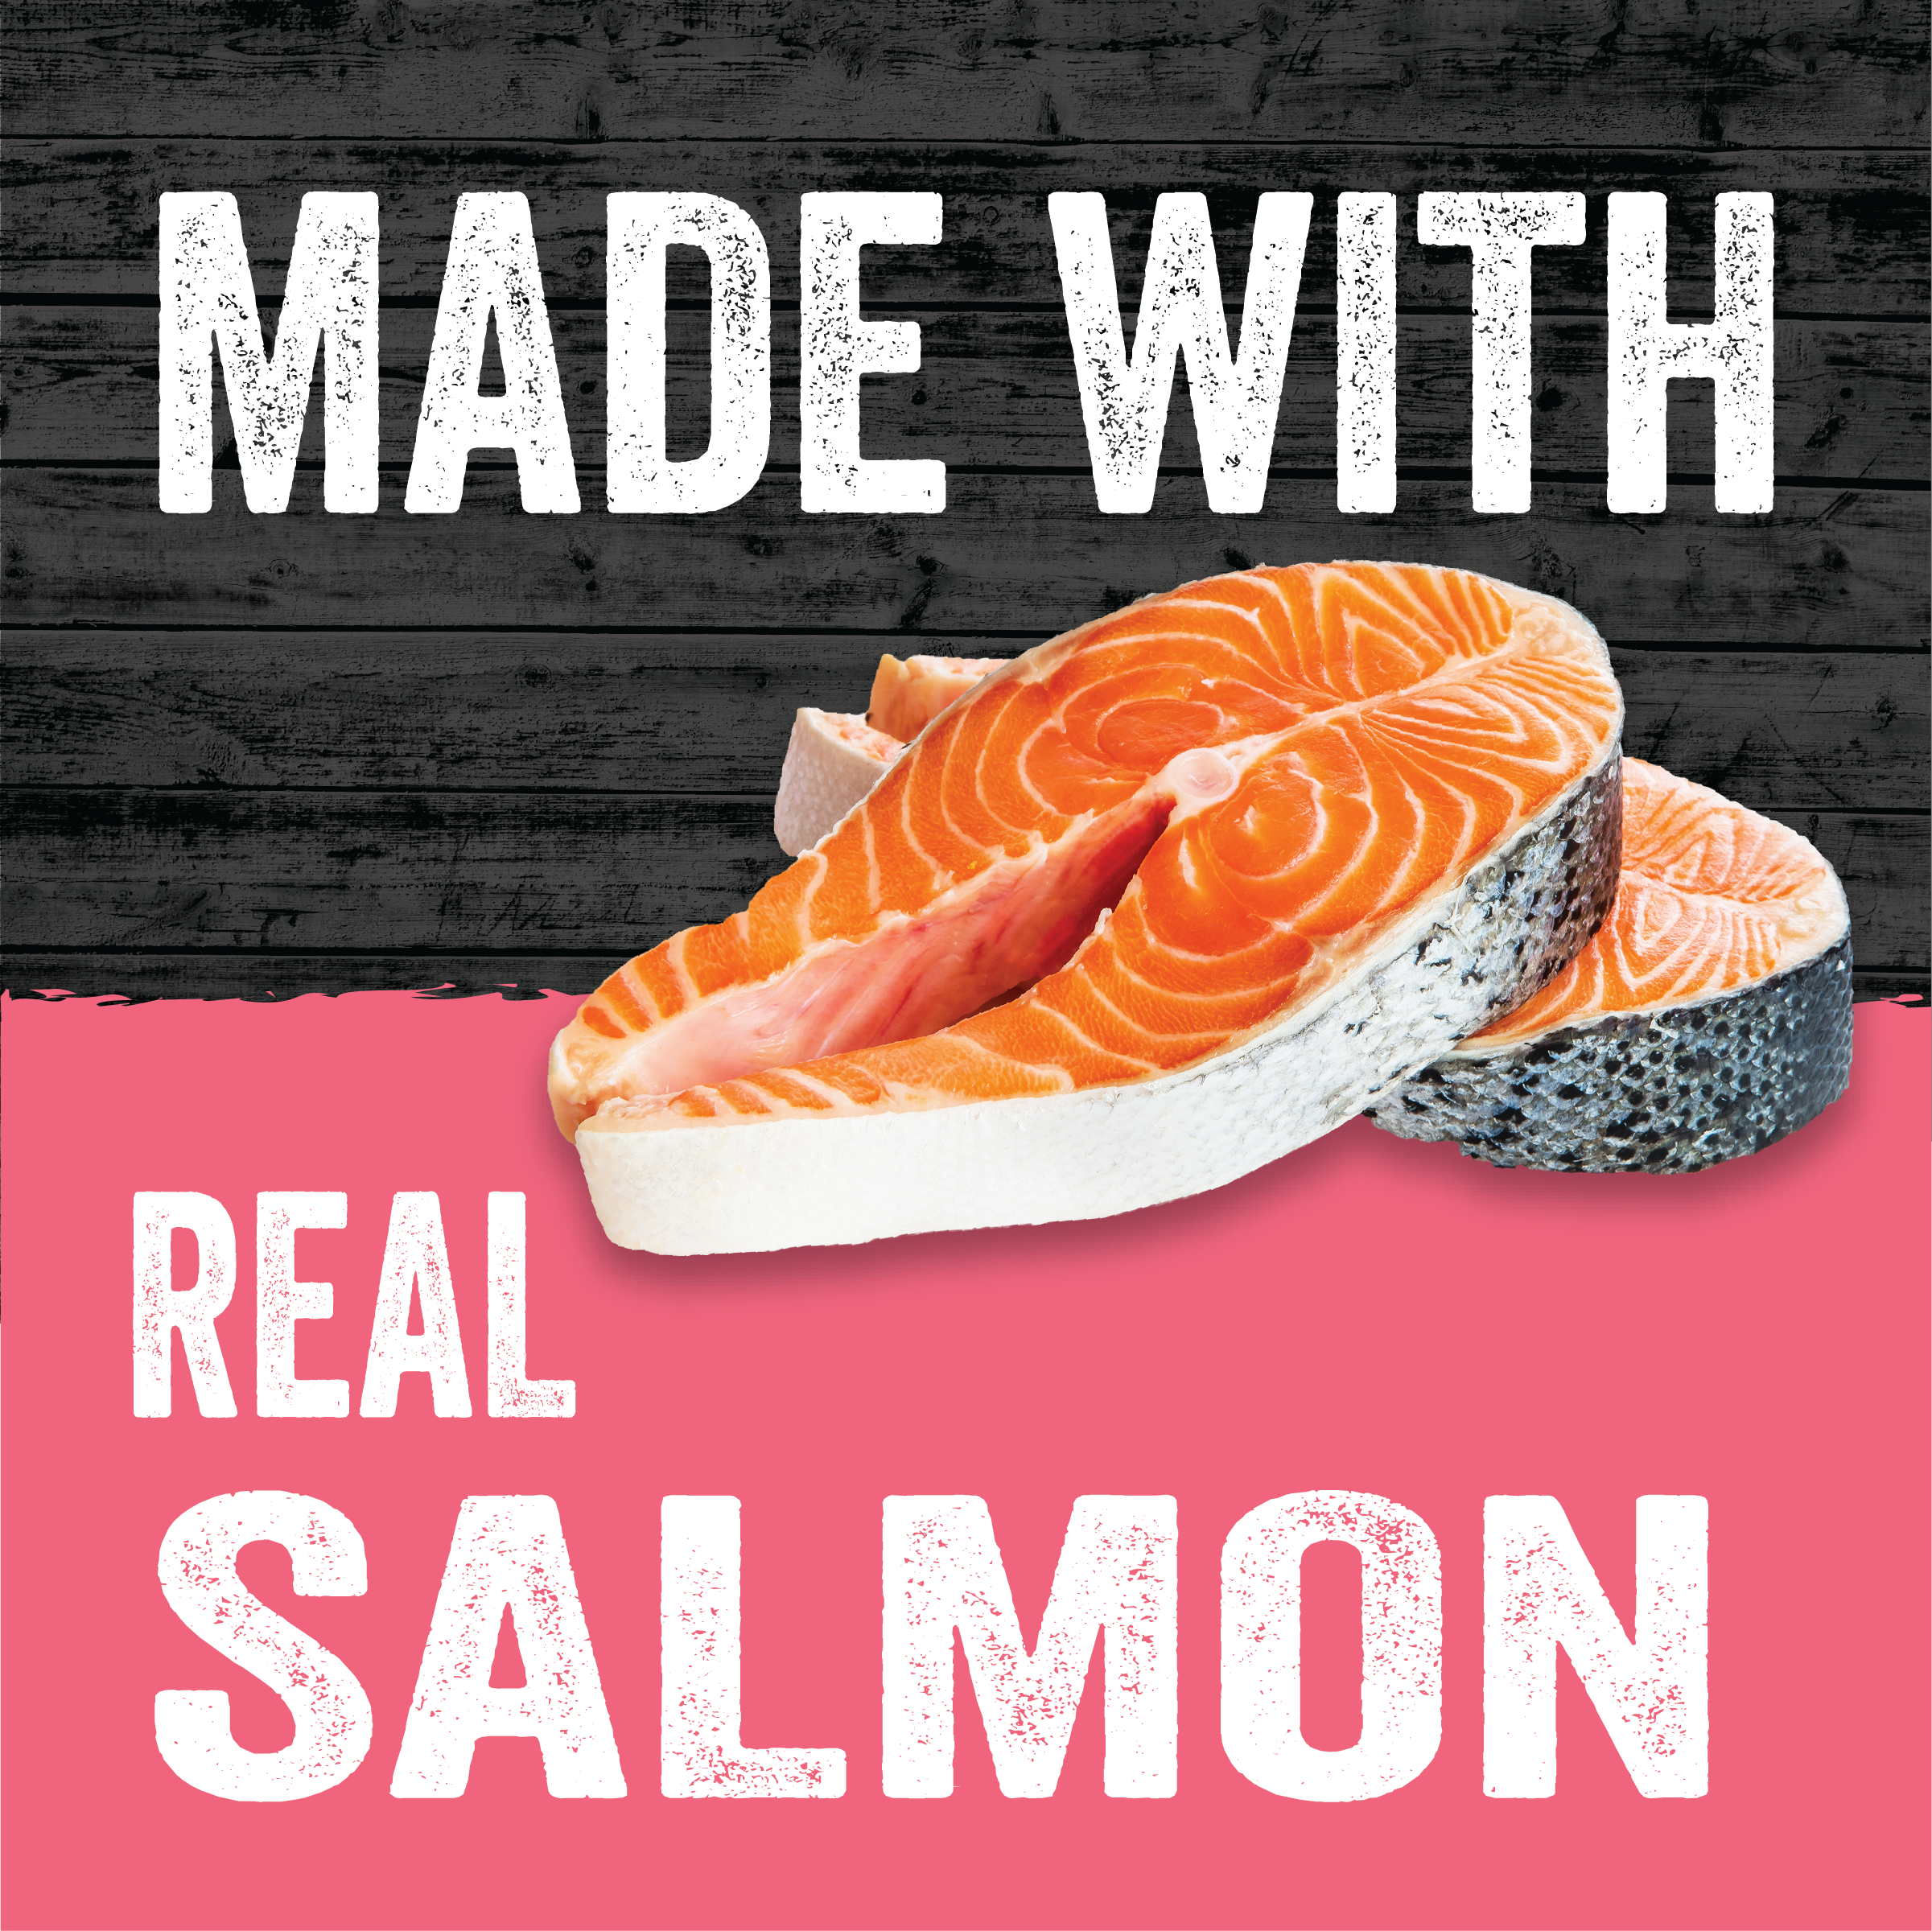 Evolve_Dog_Classic_CraftedMeals_Salmon_Layout-03.png